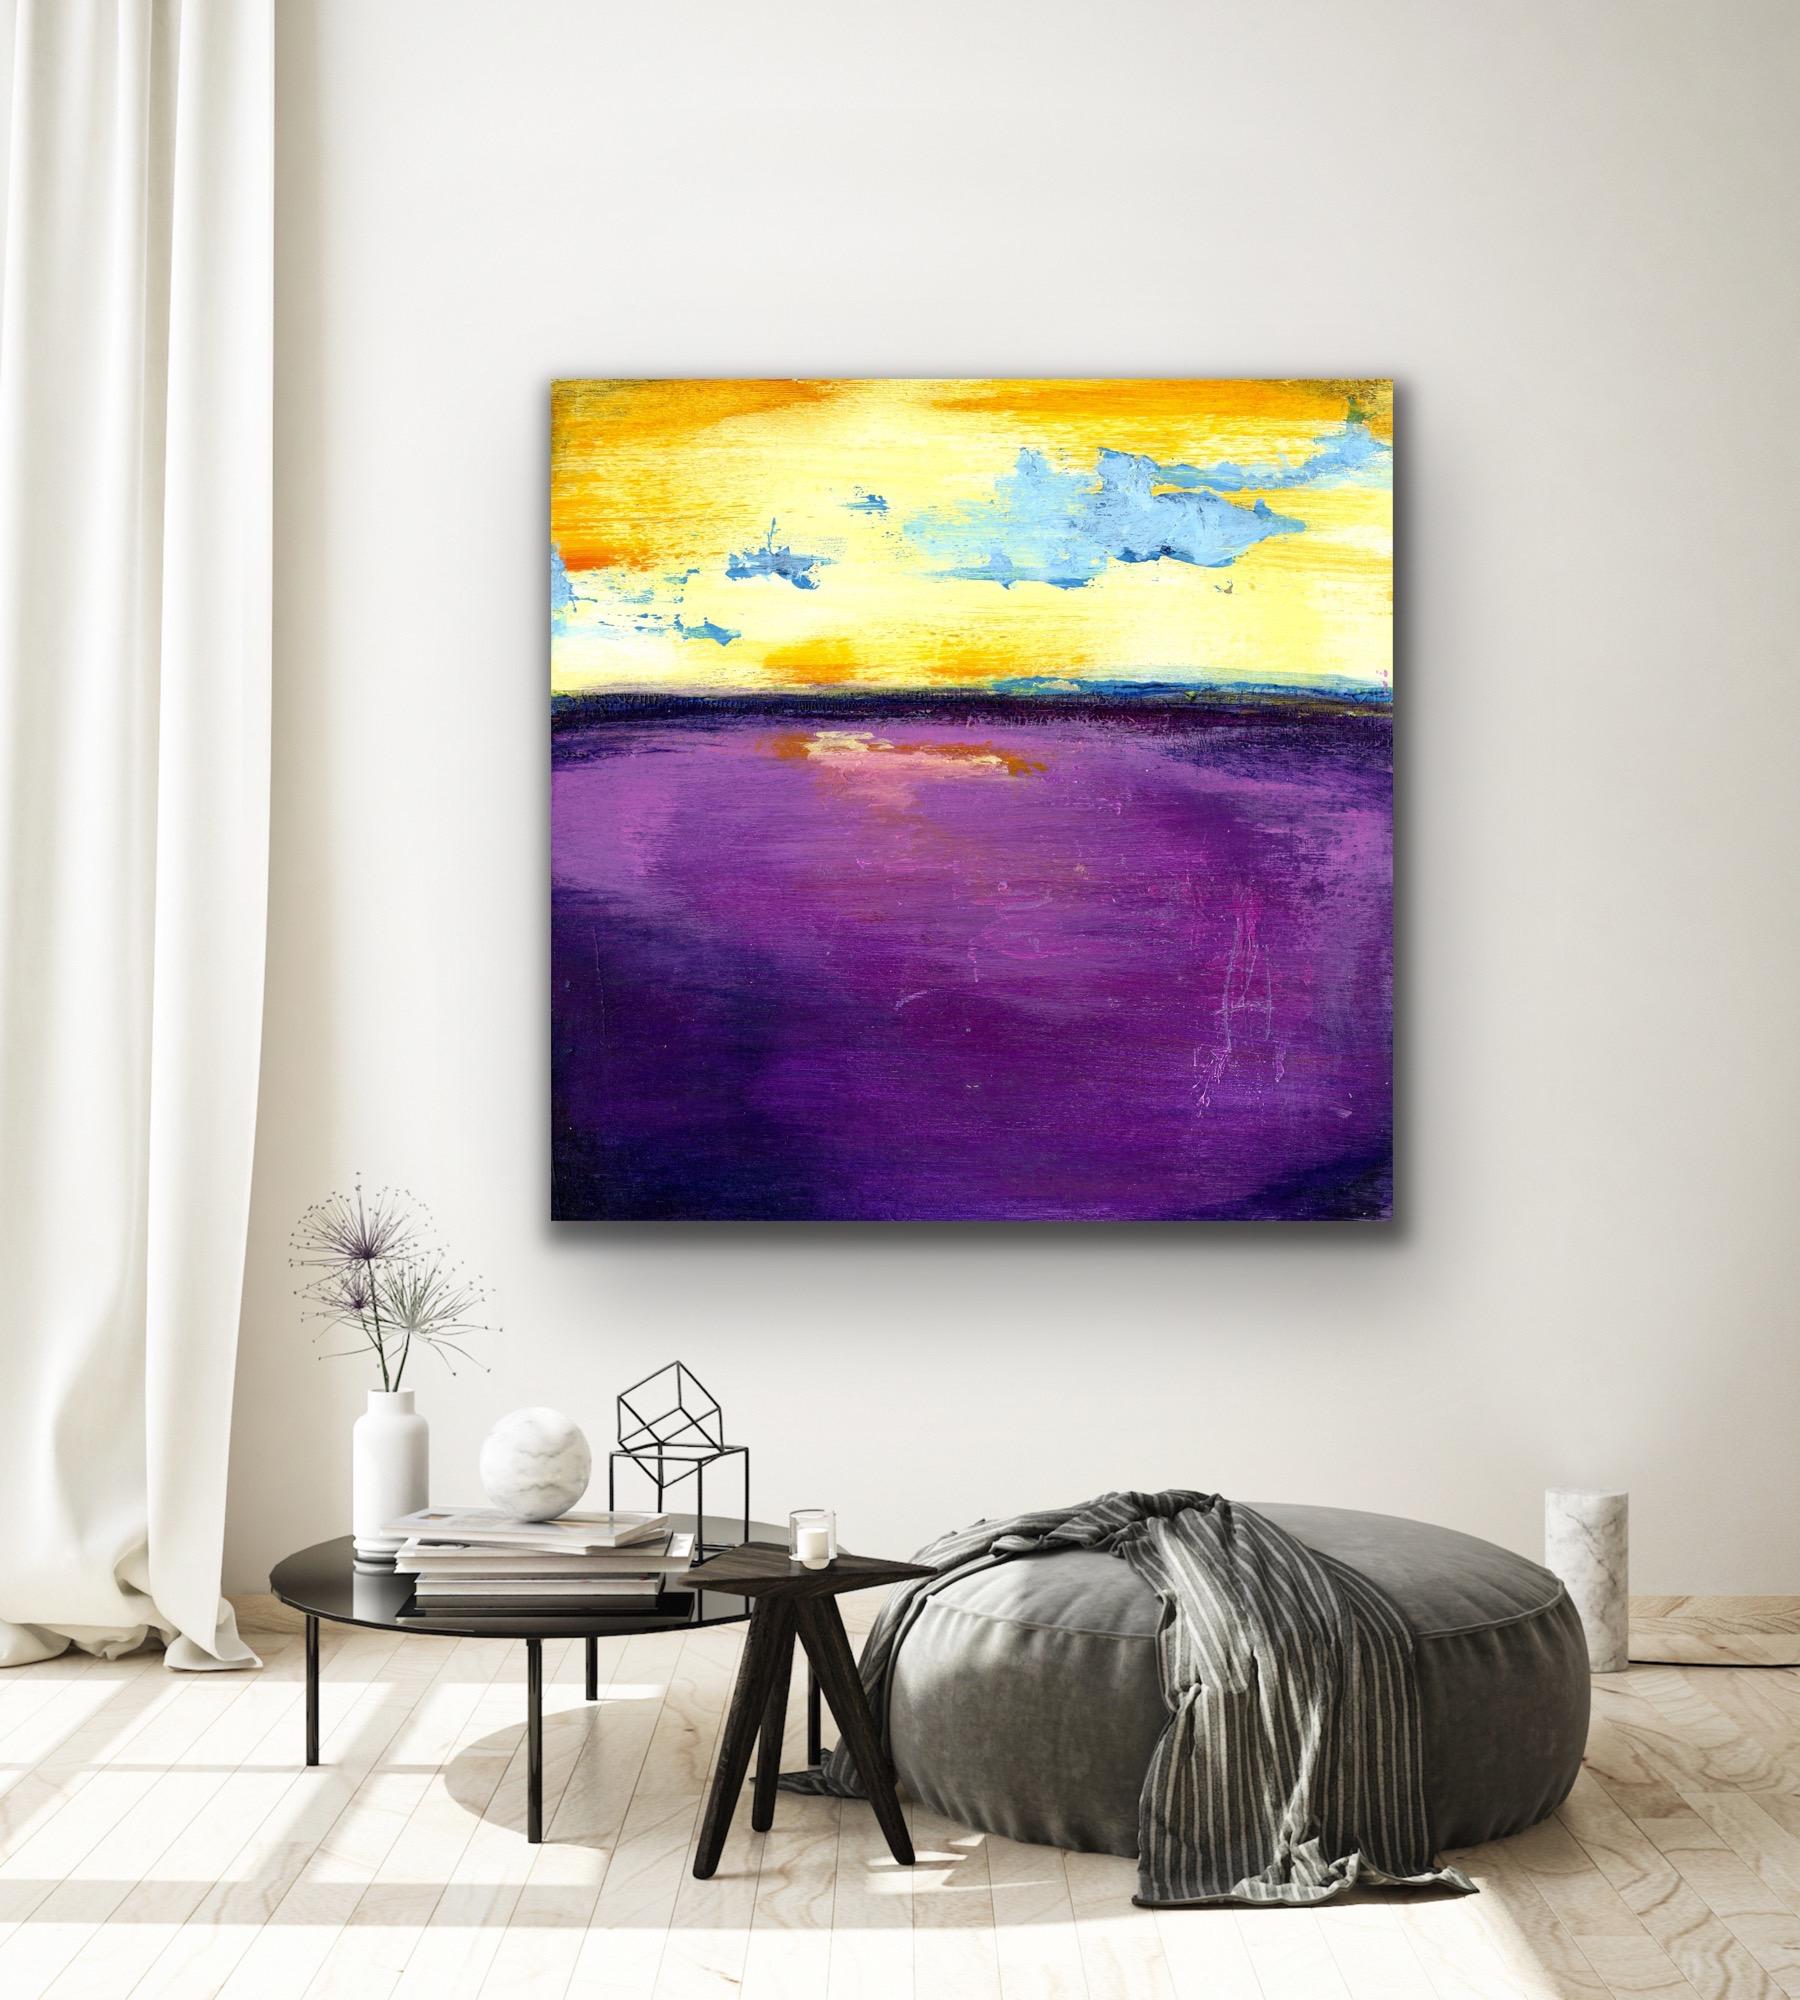 Modern Wall Print Art, Abstract Ocean Landscape Giclee, Limited Edition Signed For Sale 5